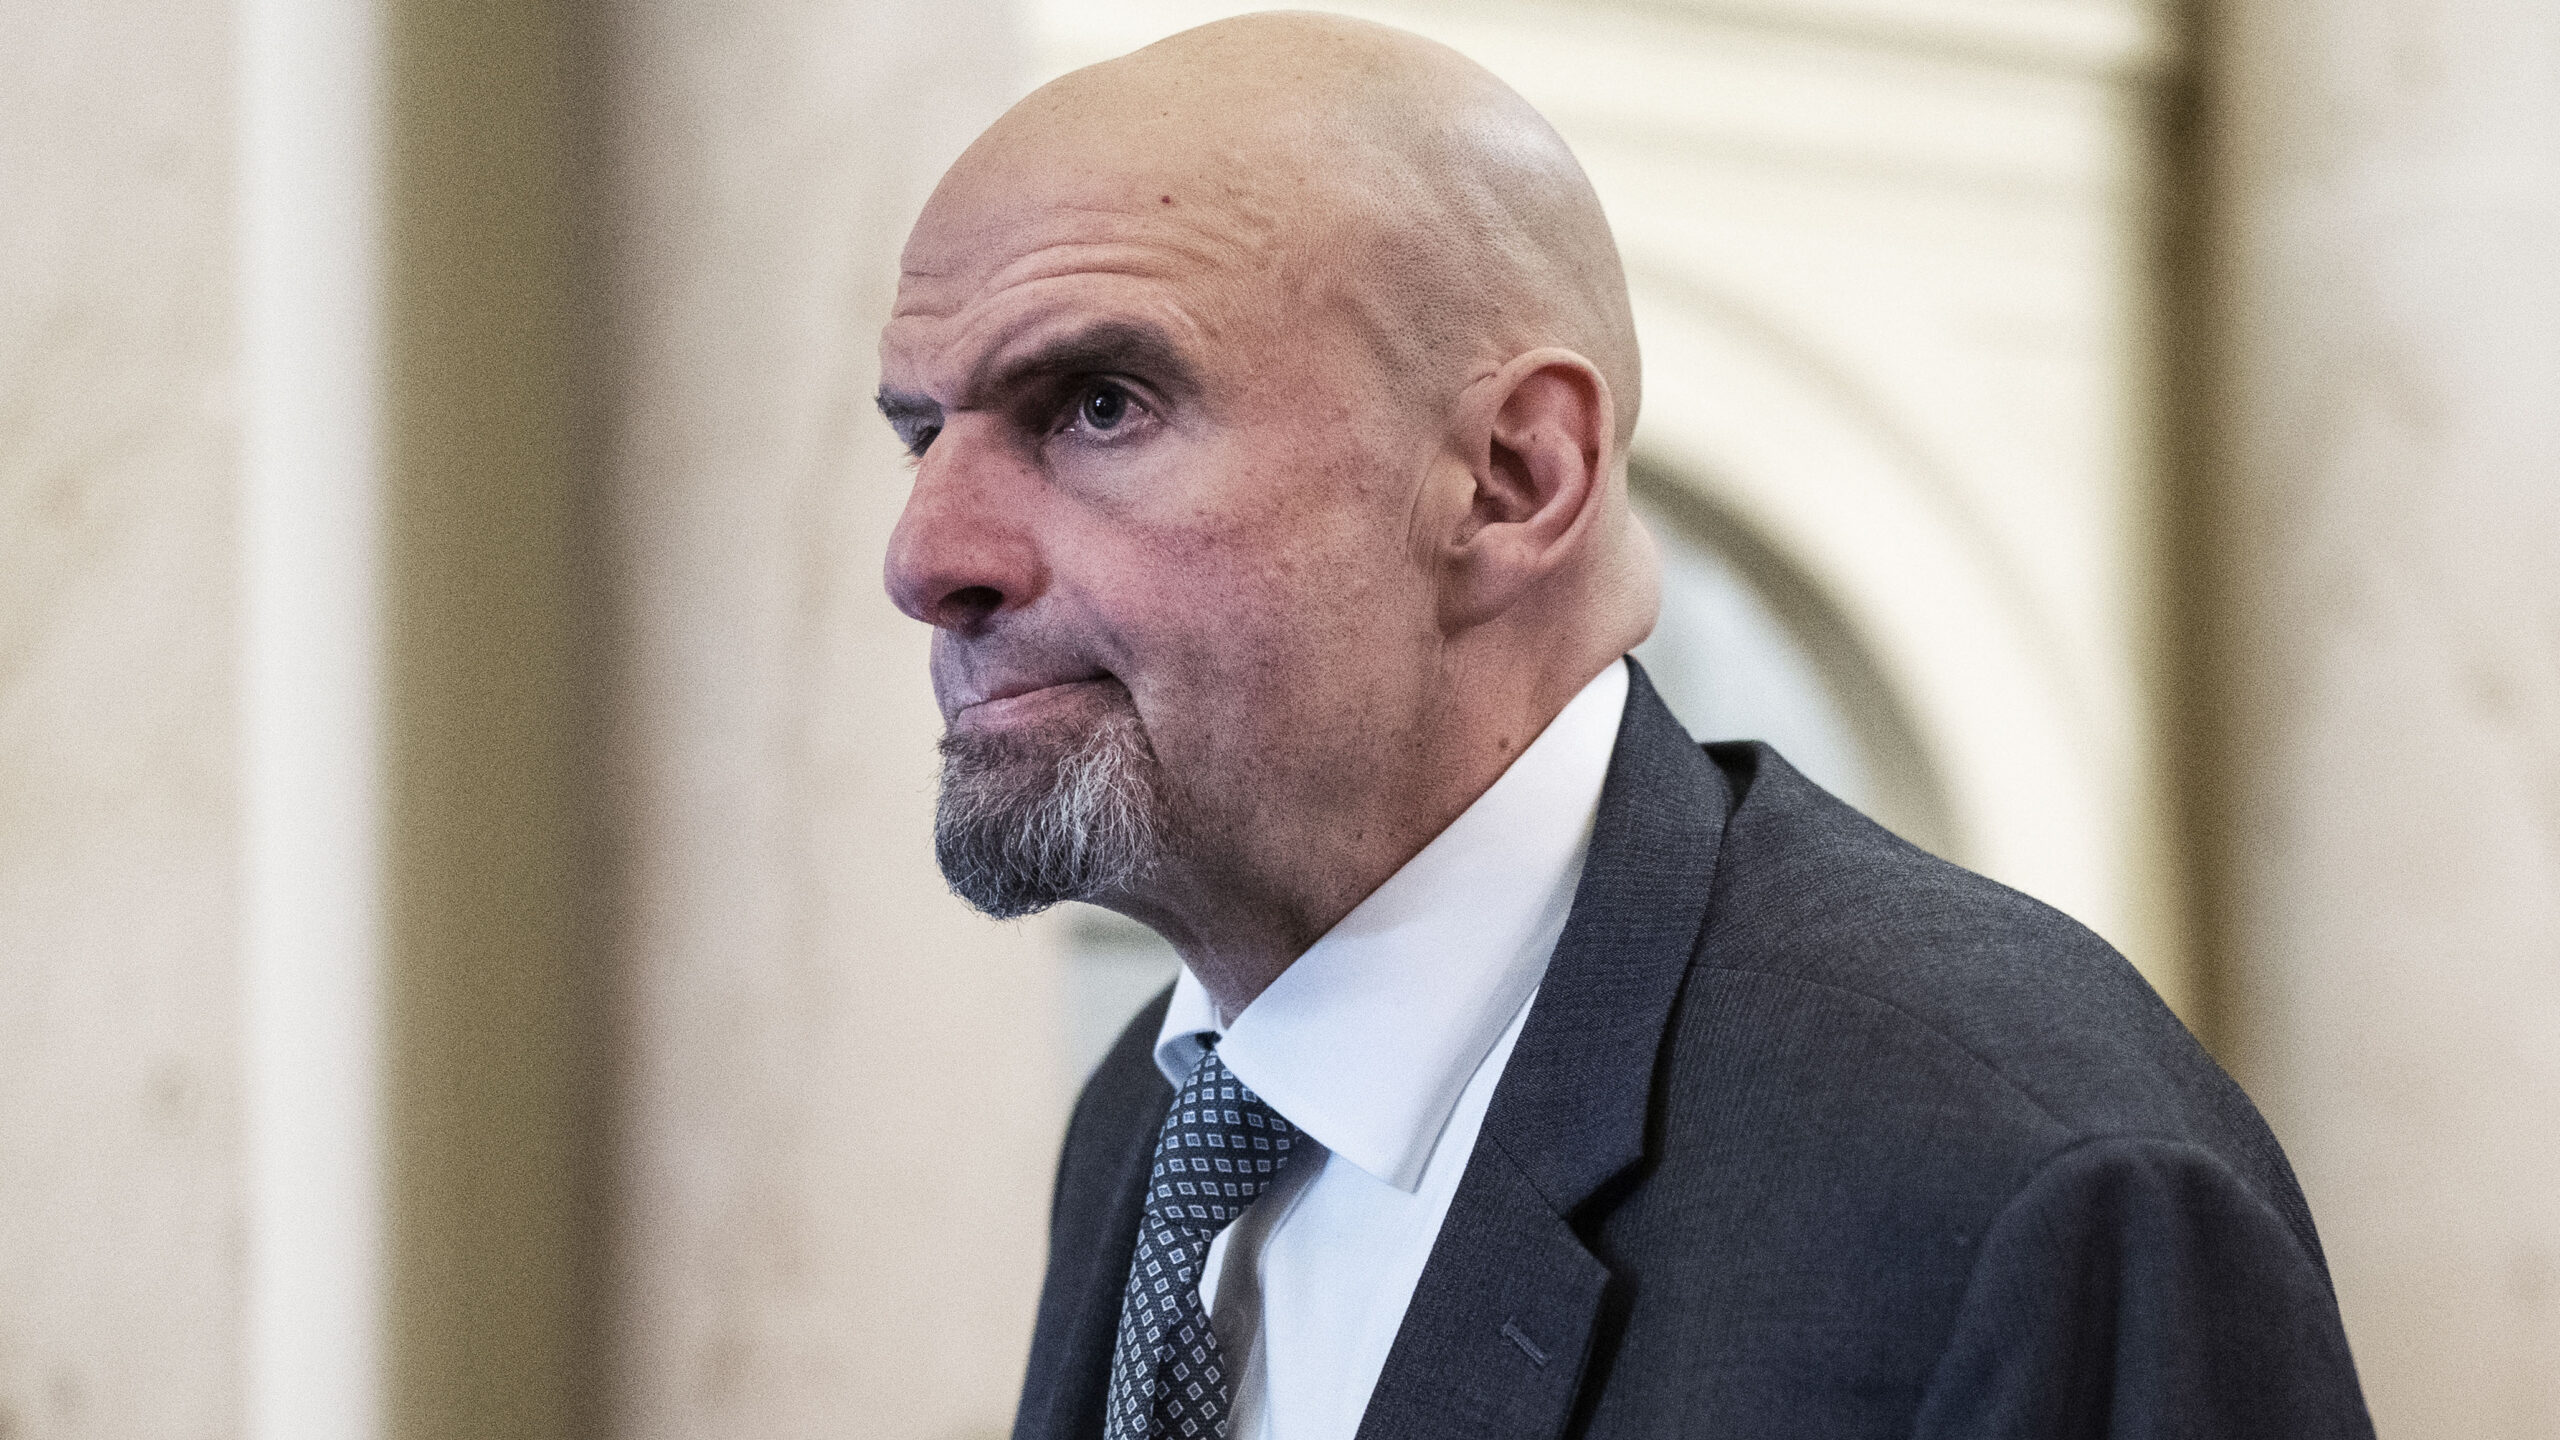 Questions Grow About Senator John Fetterman After Latest Alleged Actions While Hospitalized